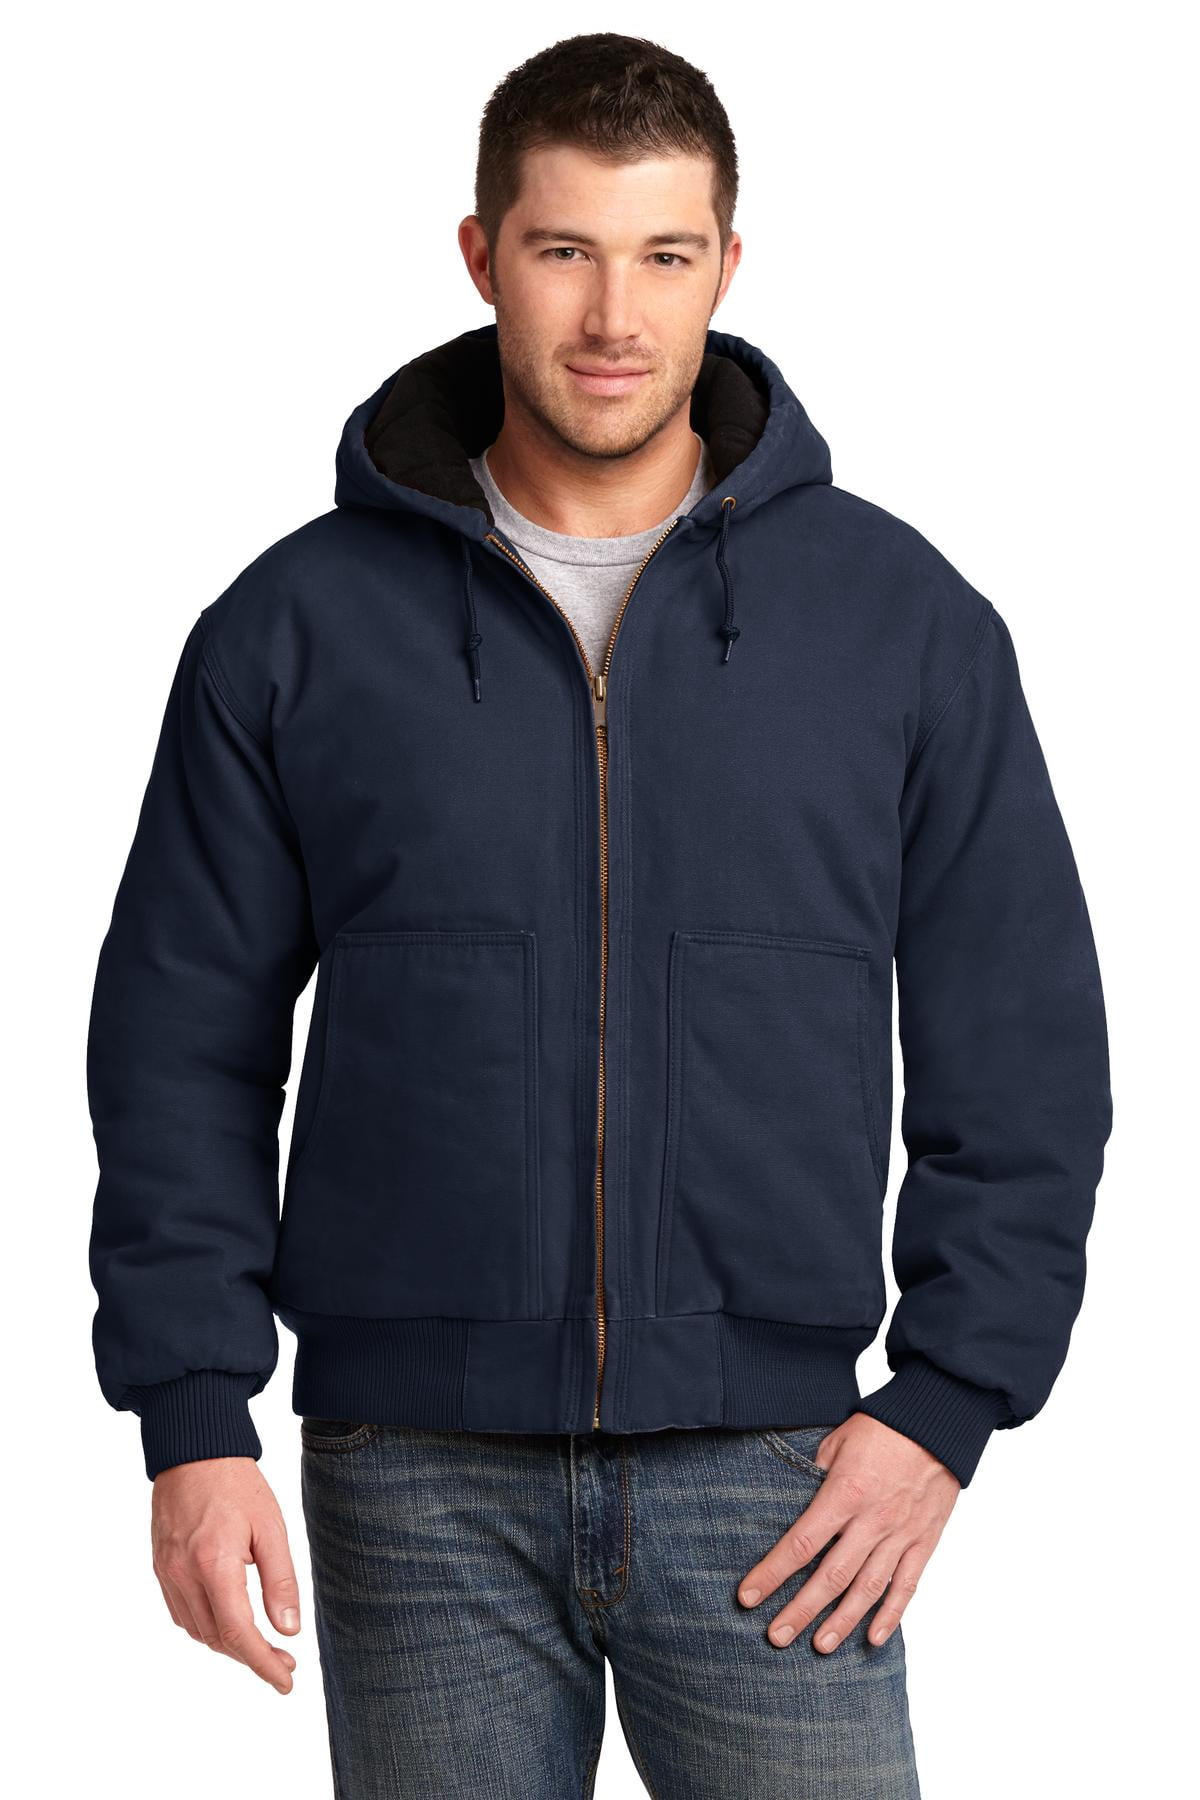 CornerStone Washed Duck Cloth Insulated Hooded Work Jacket 